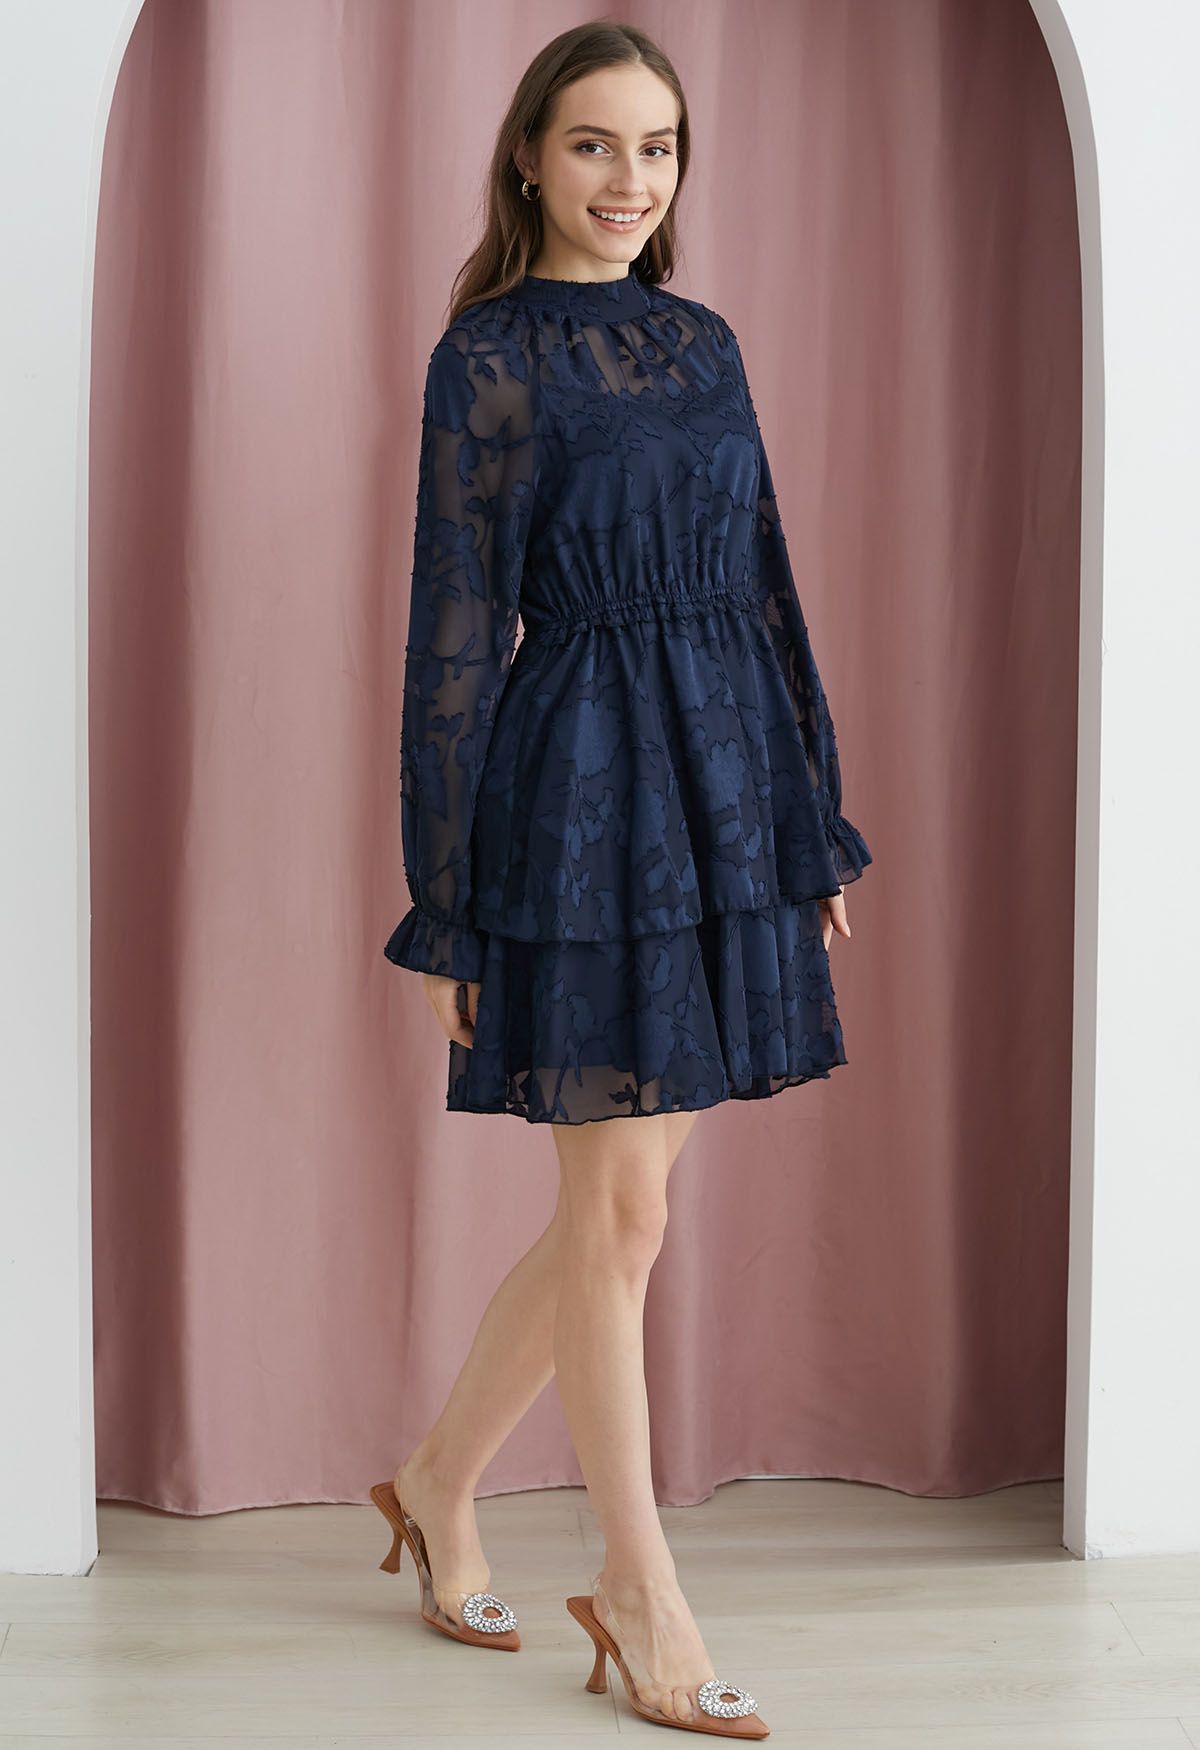 Floral Jacquard Mesh Tiered Mini Dress in Navy